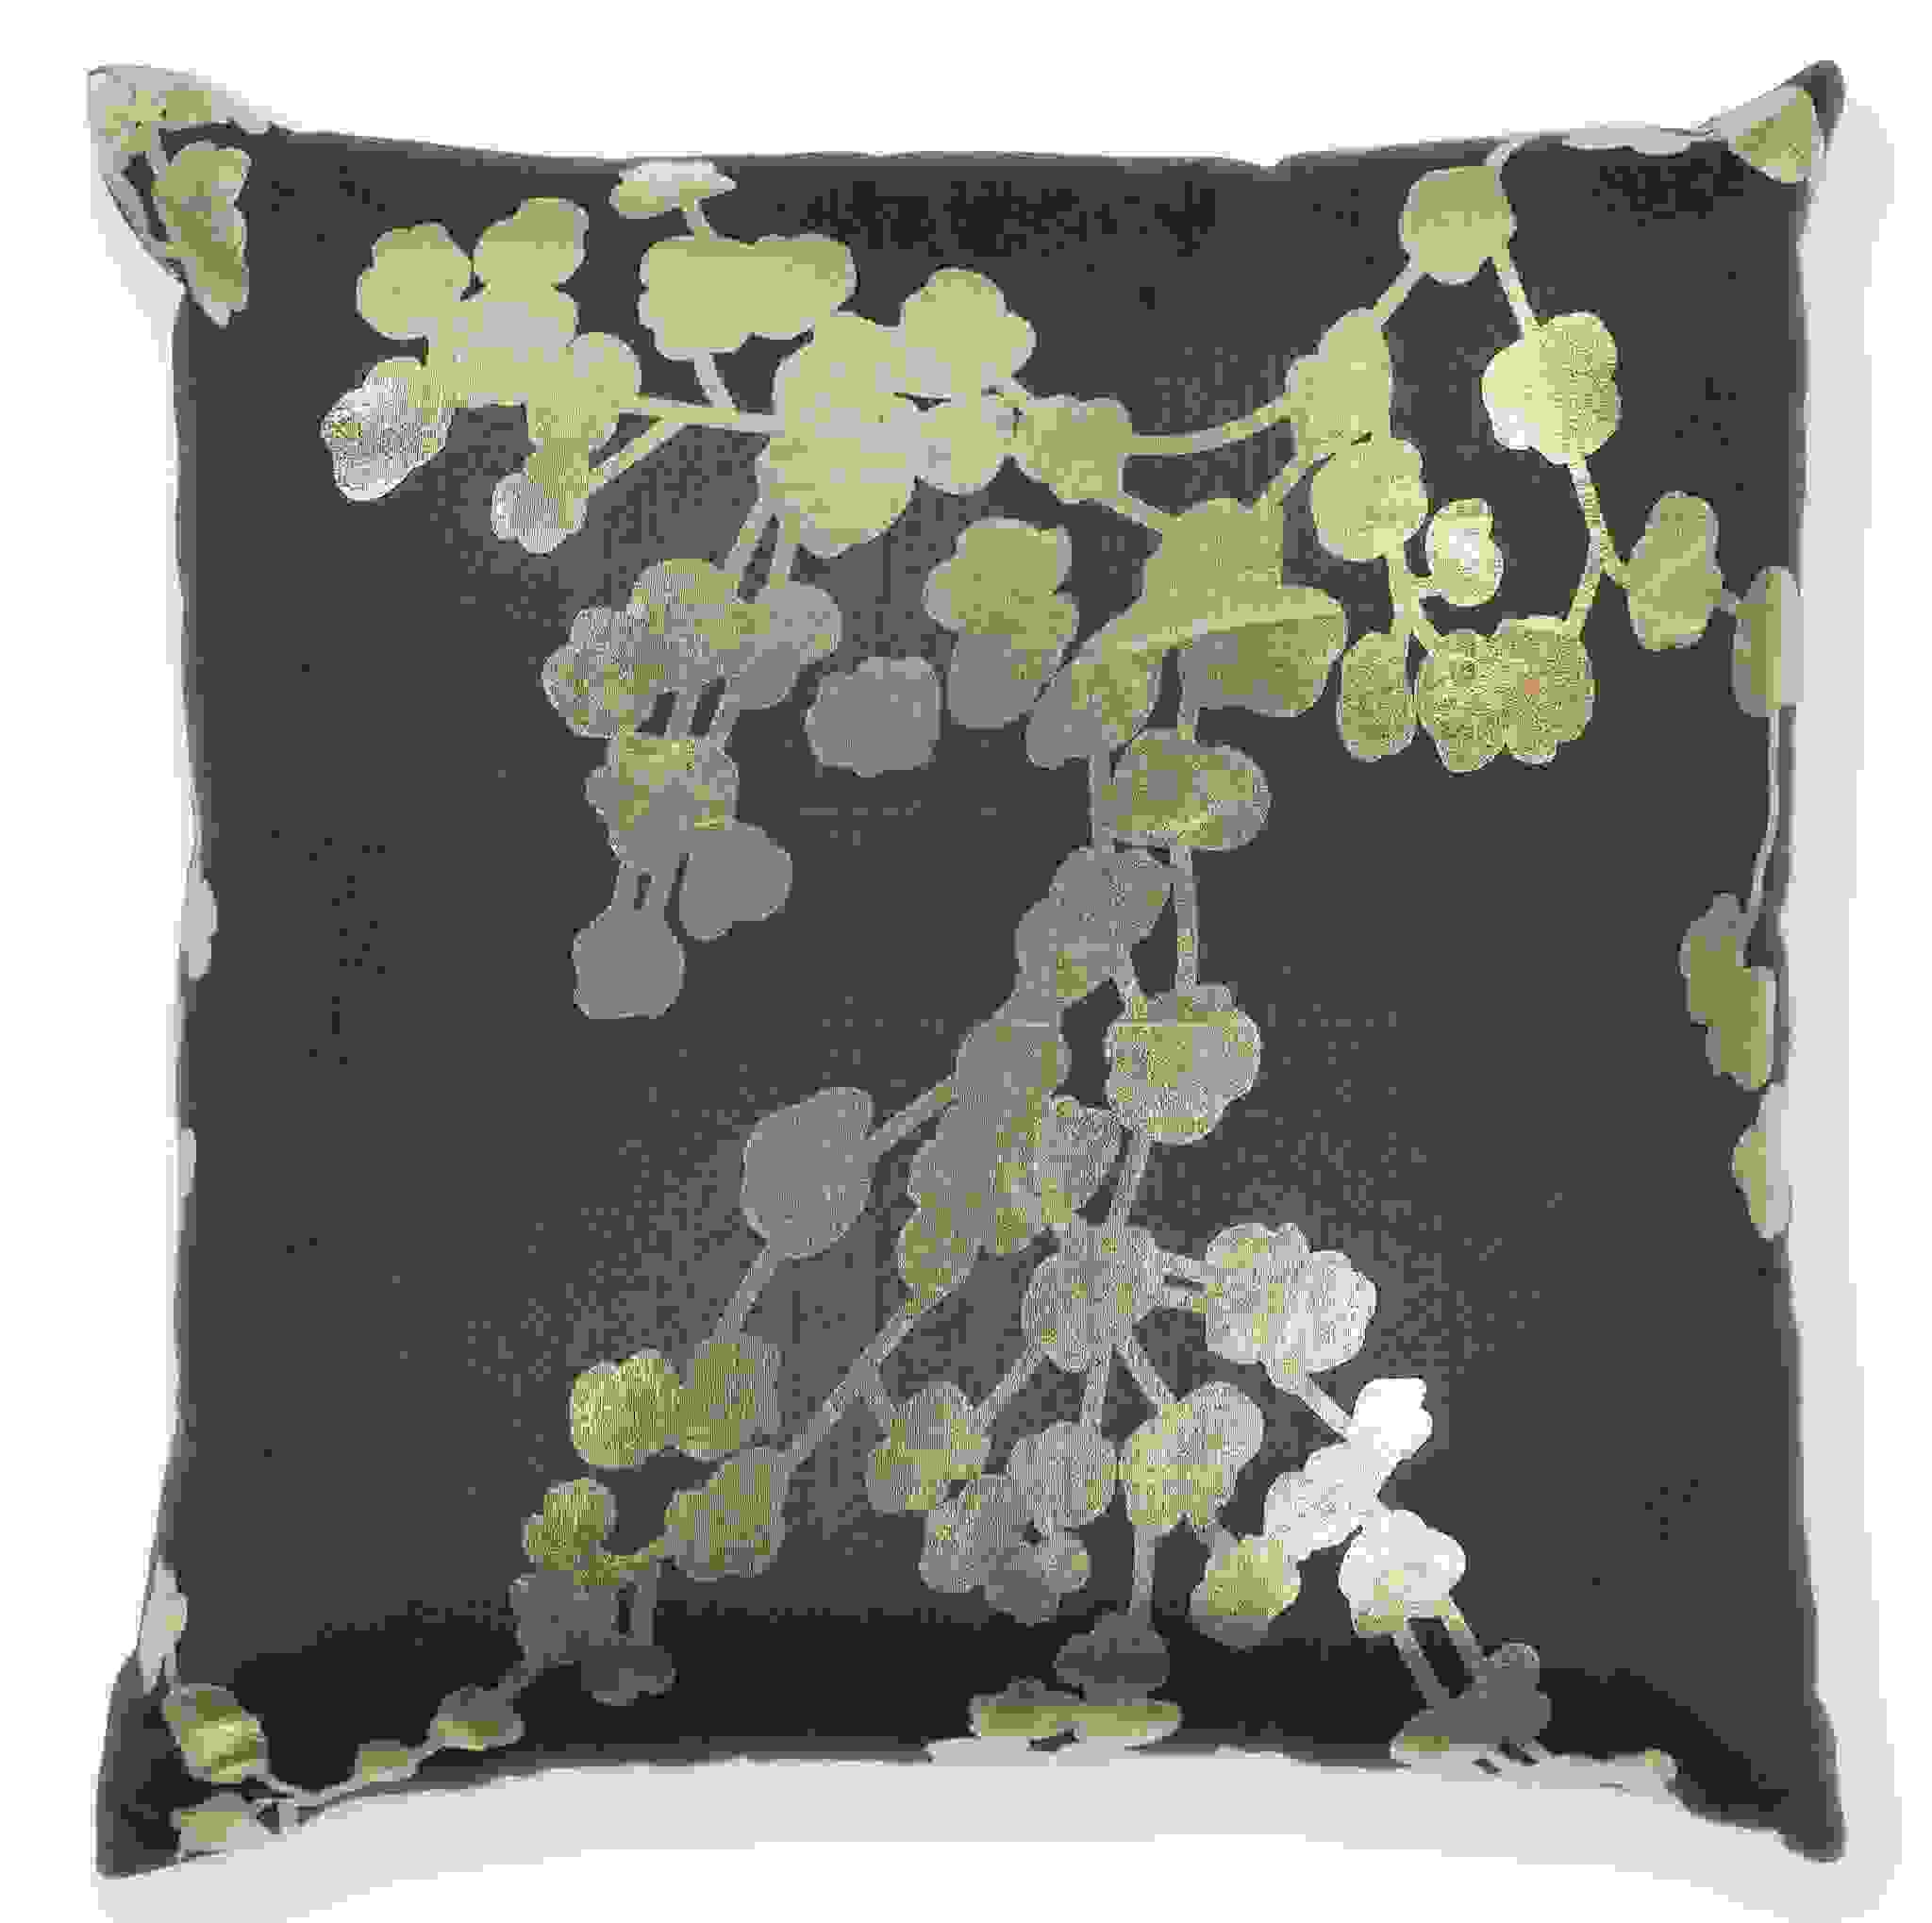 18" x 18" Polyester Chocolate Pillow